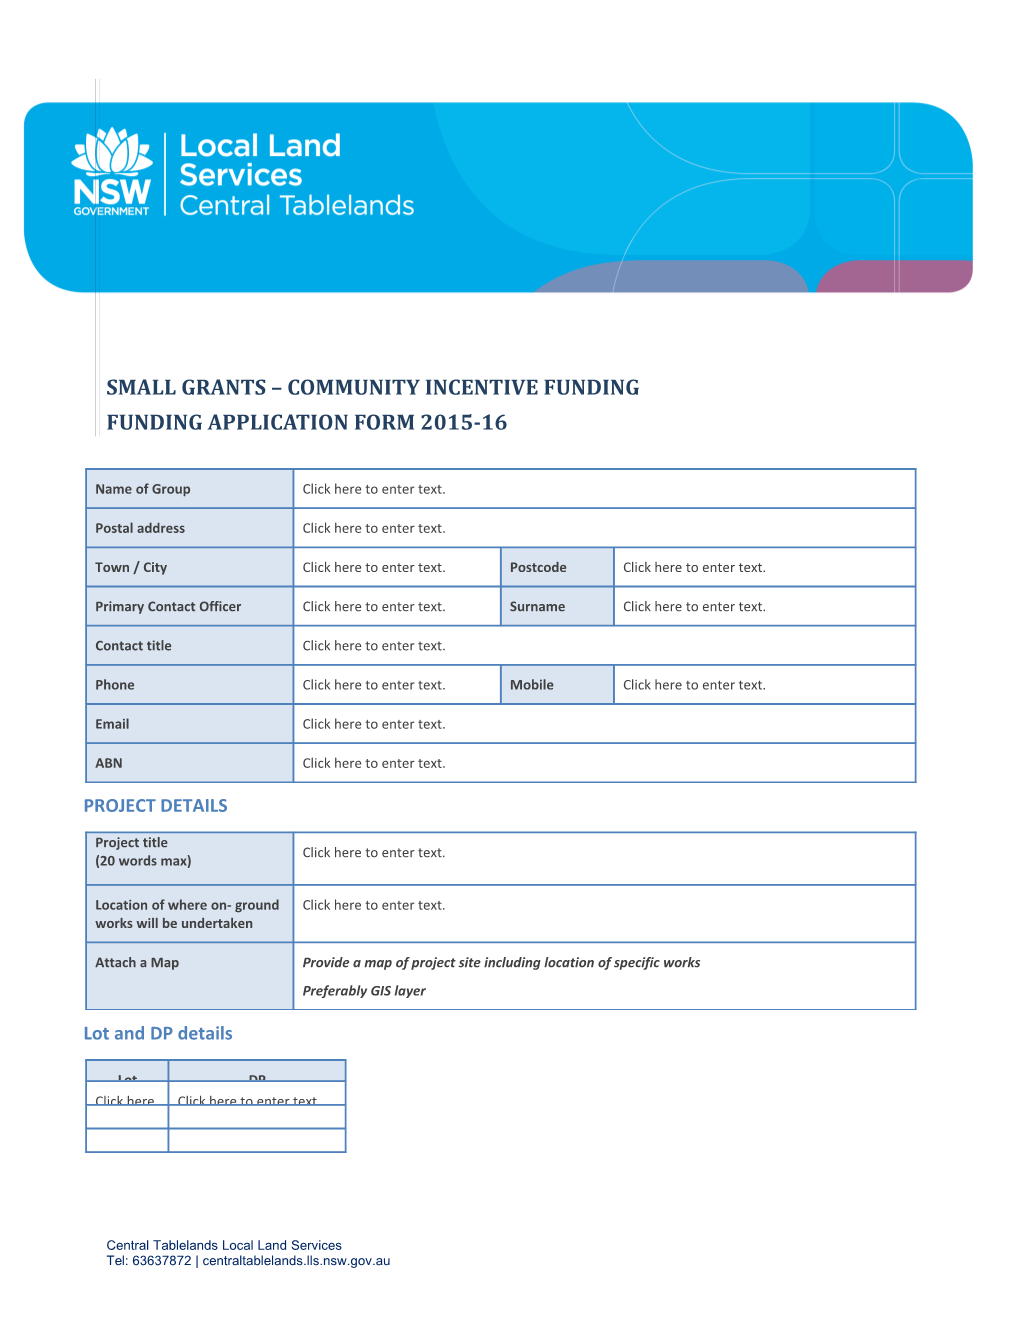 Funding Application Form 2015-16